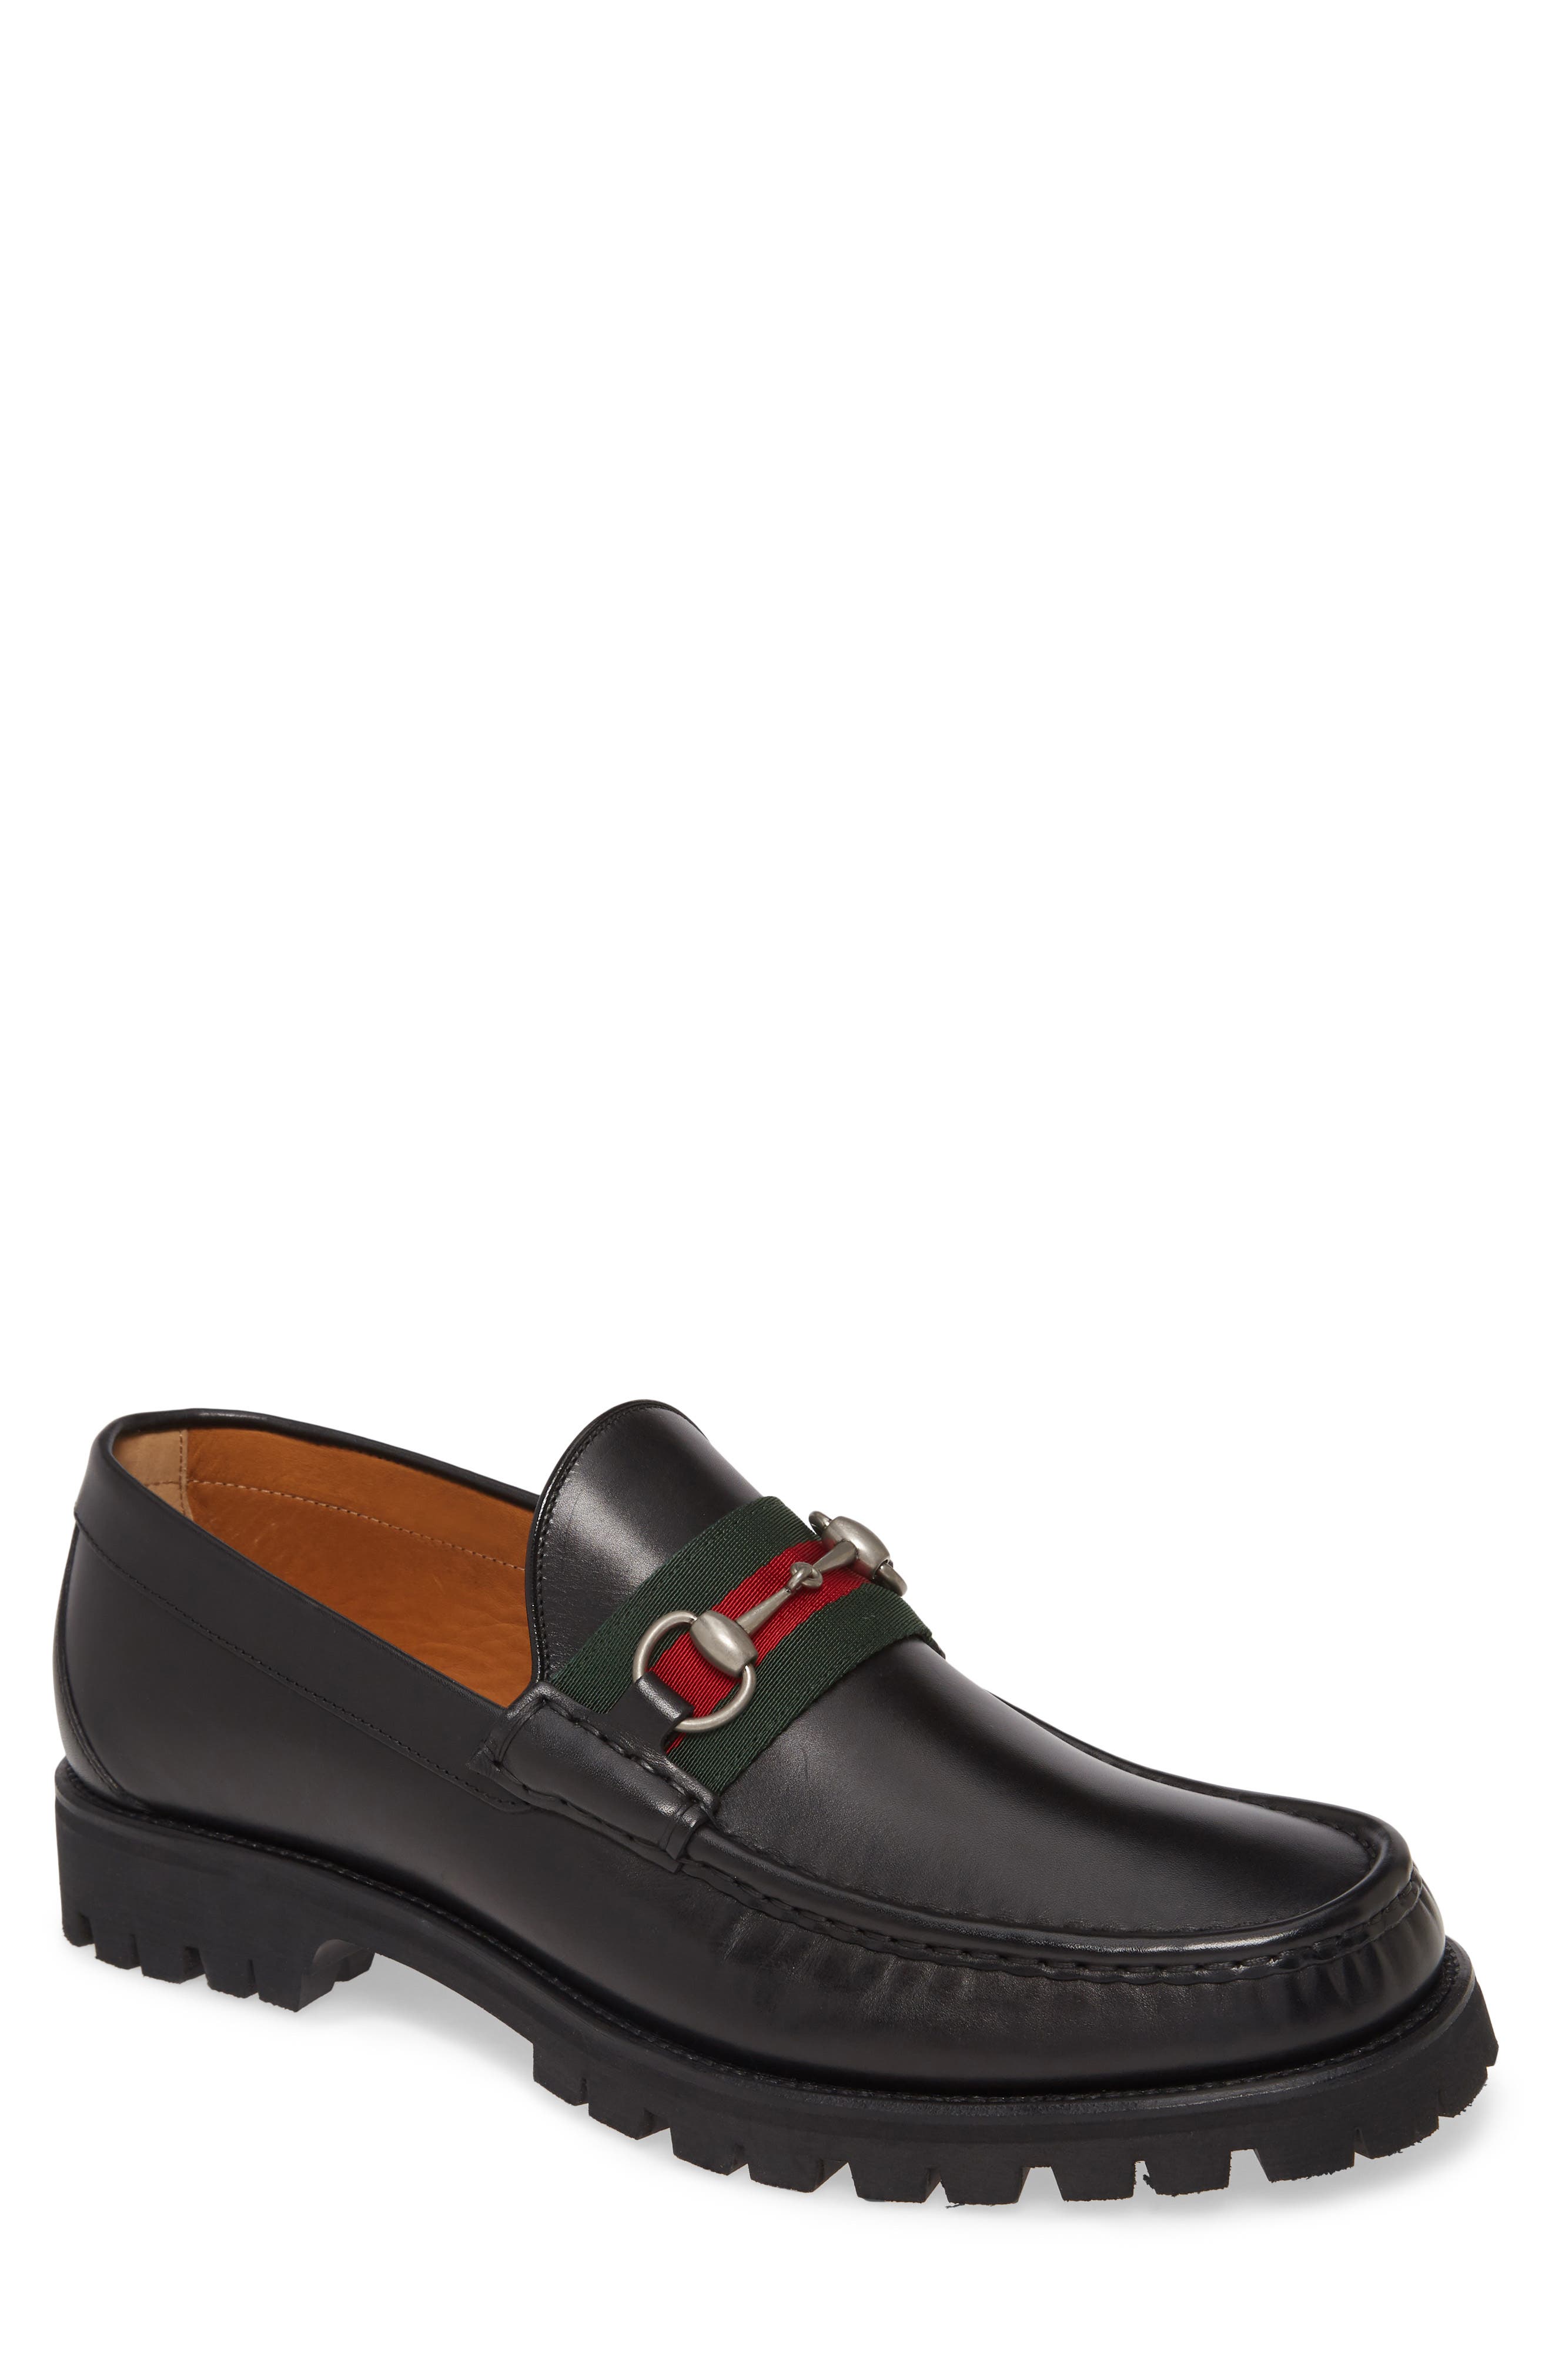 gucci lug sole loafer brown